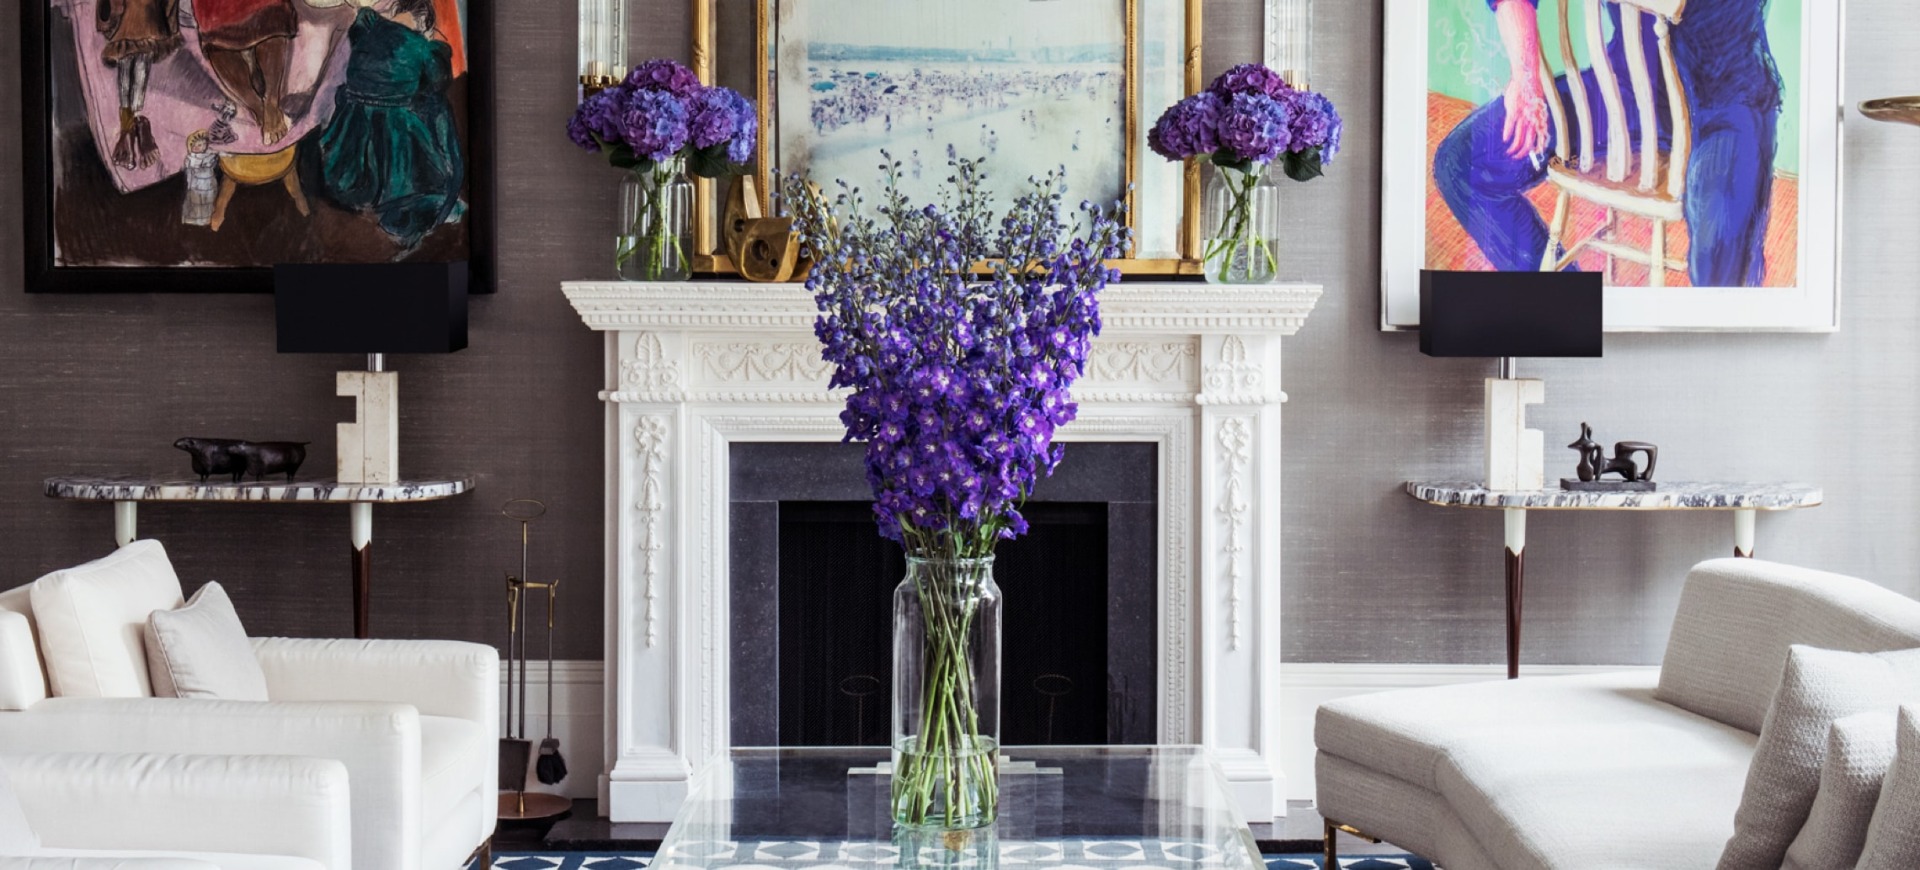 Flower Subscriptions Free Us Delivery Luxury Flower Subscriptions Usa Flowerbx Usa